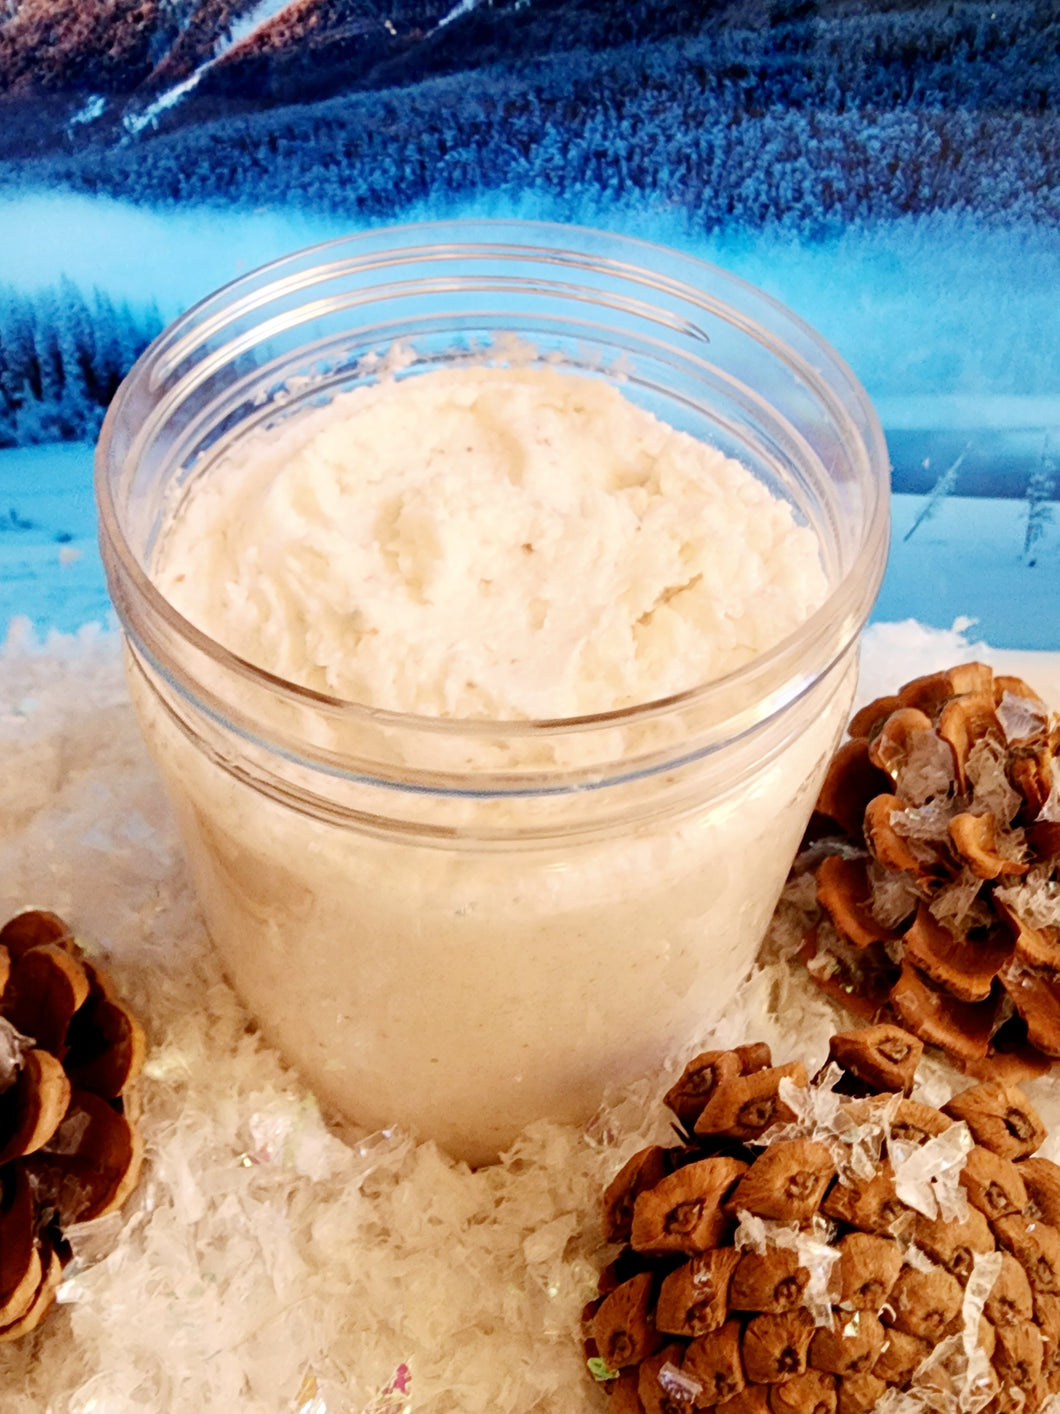 The Holiday Collection - Whipped Soap Scrub